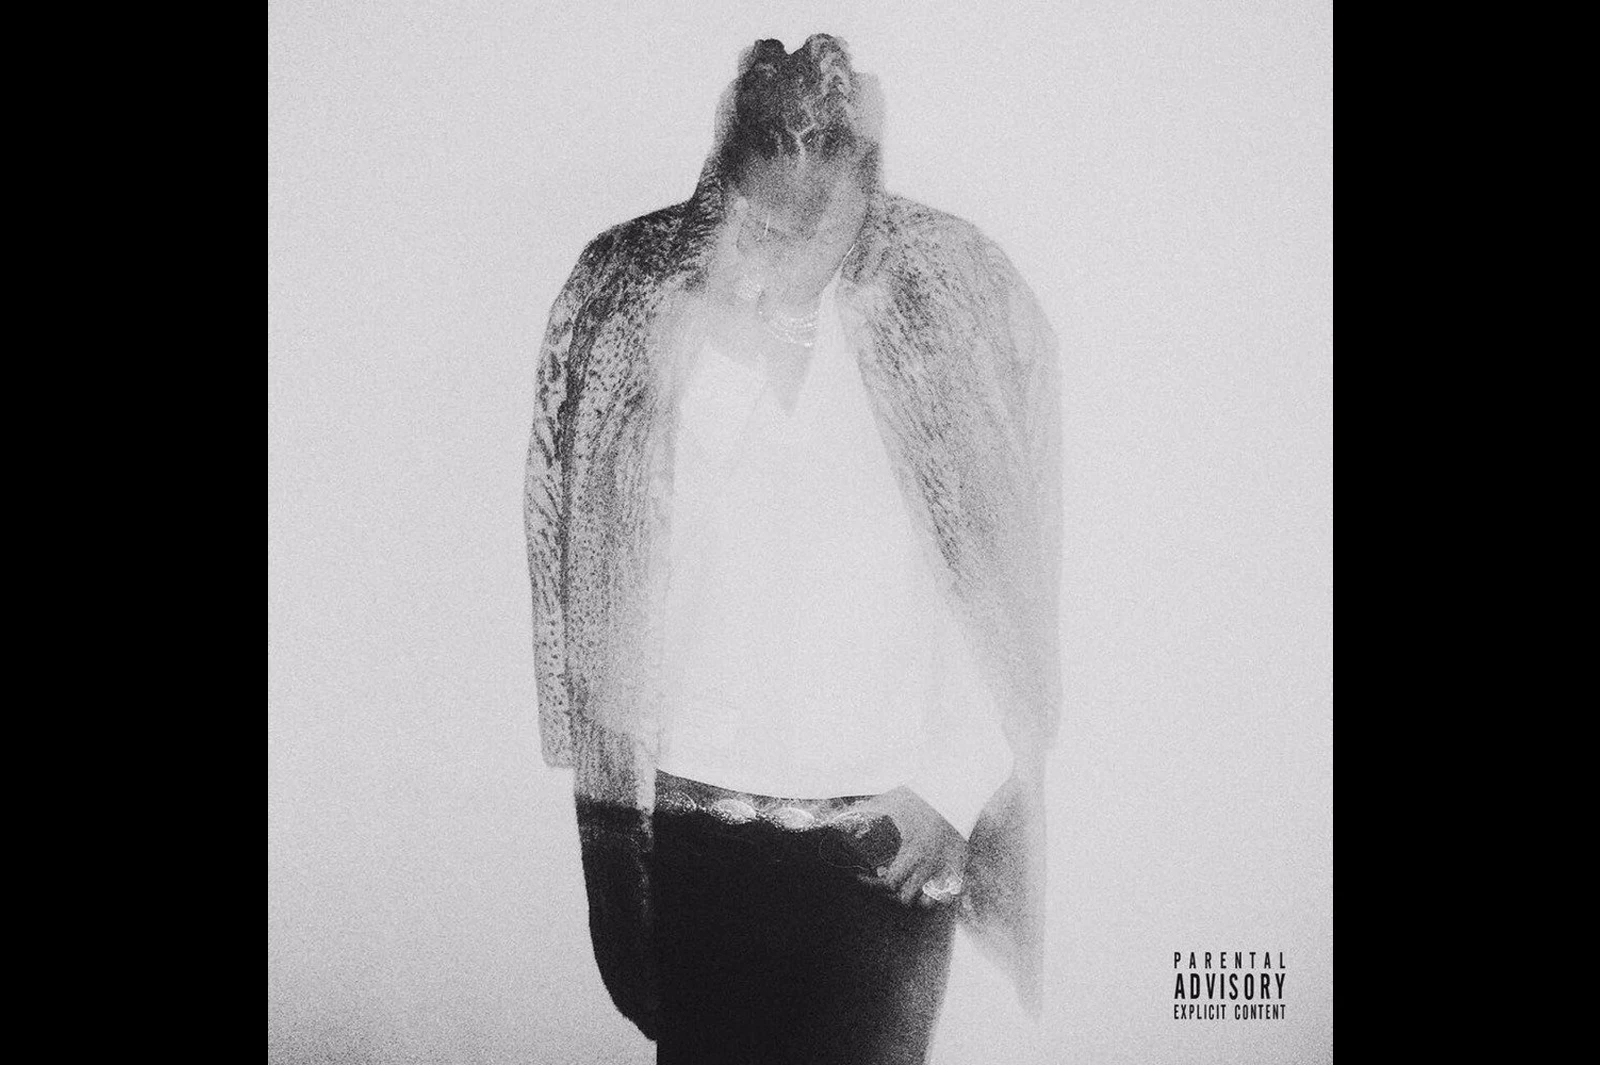 https://townsquare.media/site/812/files/2017/04/lead-up-future-hndrxx.jpg